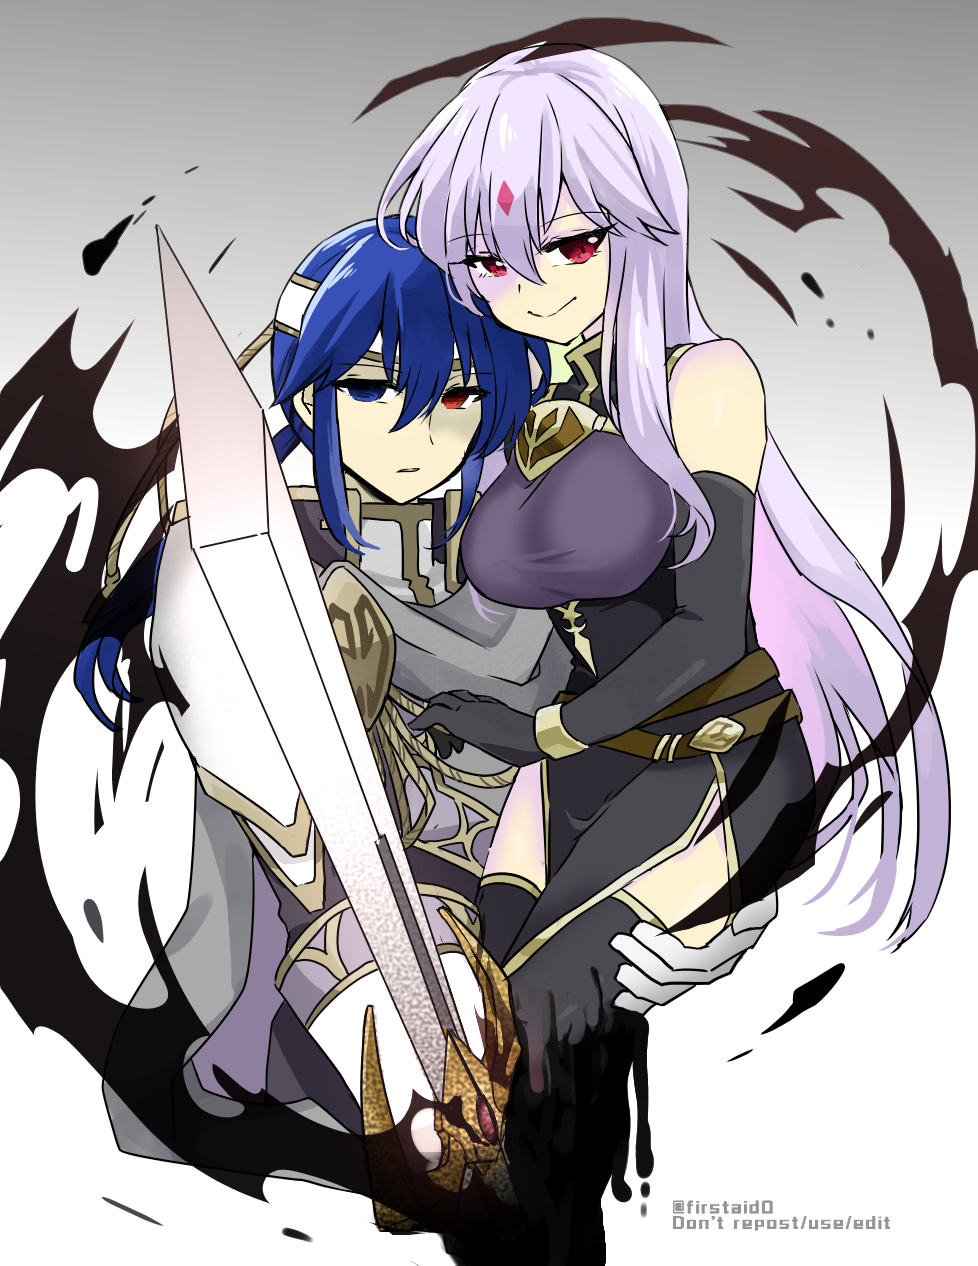 1boy 1girl alternate_costume aura bare_shoulders blue_eyes breasts brother_and_sister corruption dark_aura dark_persona evil_grin evil_smile facial_mark fire_emblem fire_emblem:_genealogy_of_the_holy_war forehead_mark grin headband heterochromia highres holding julia_(fire_emblem) long_hair mind_control ponytail purple_hair red_eyes seliph_(fire_emblem) siblings simple_background smile sword thighs tyrfing_(fire_emblem) weapon white_headband yukia_(firstaid0)